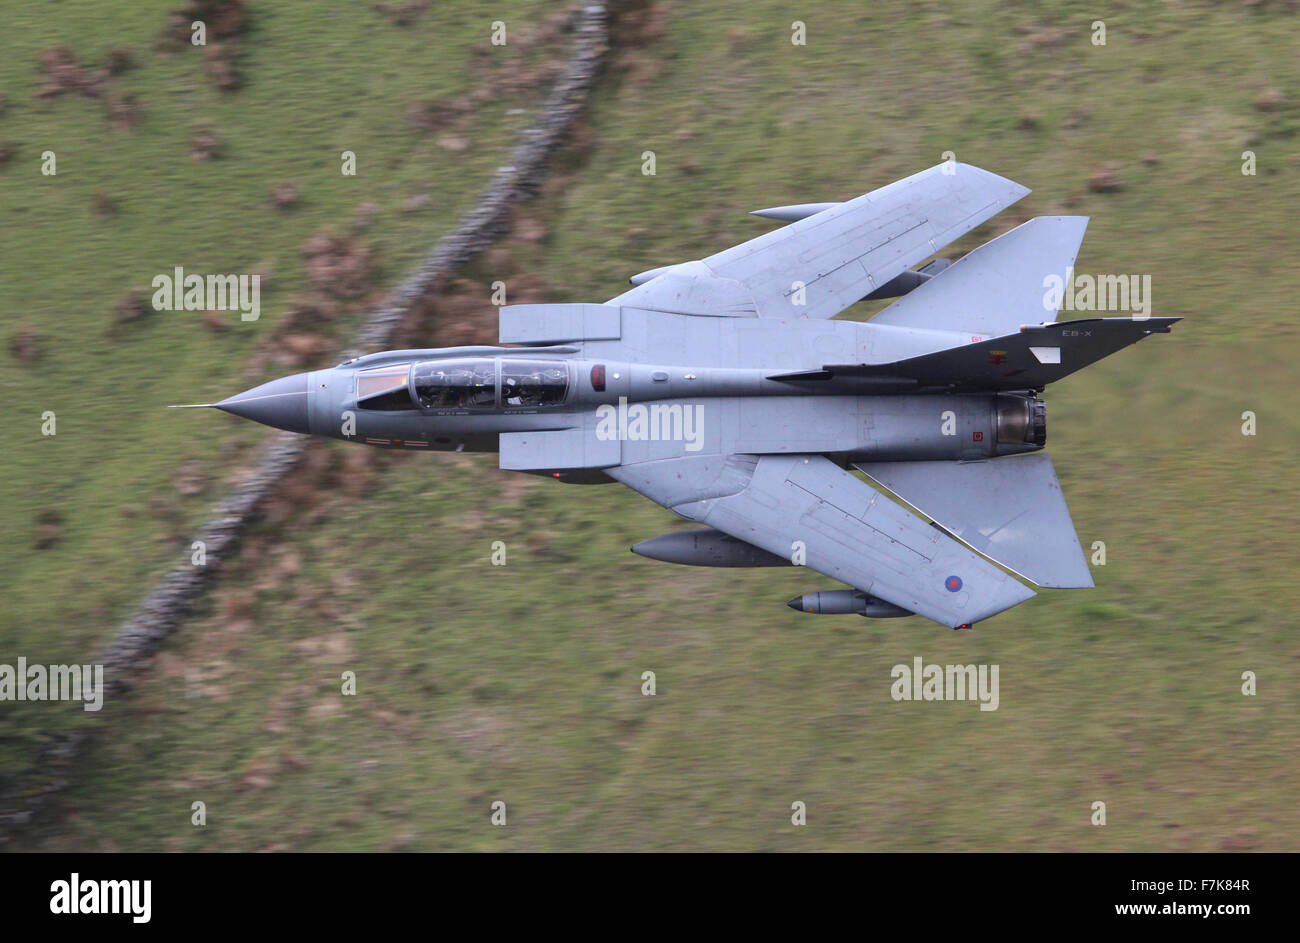 RAF Tornado GR4 aircraft on a low level flying exercise in Wales, UK, May, 2015. Stock Photo